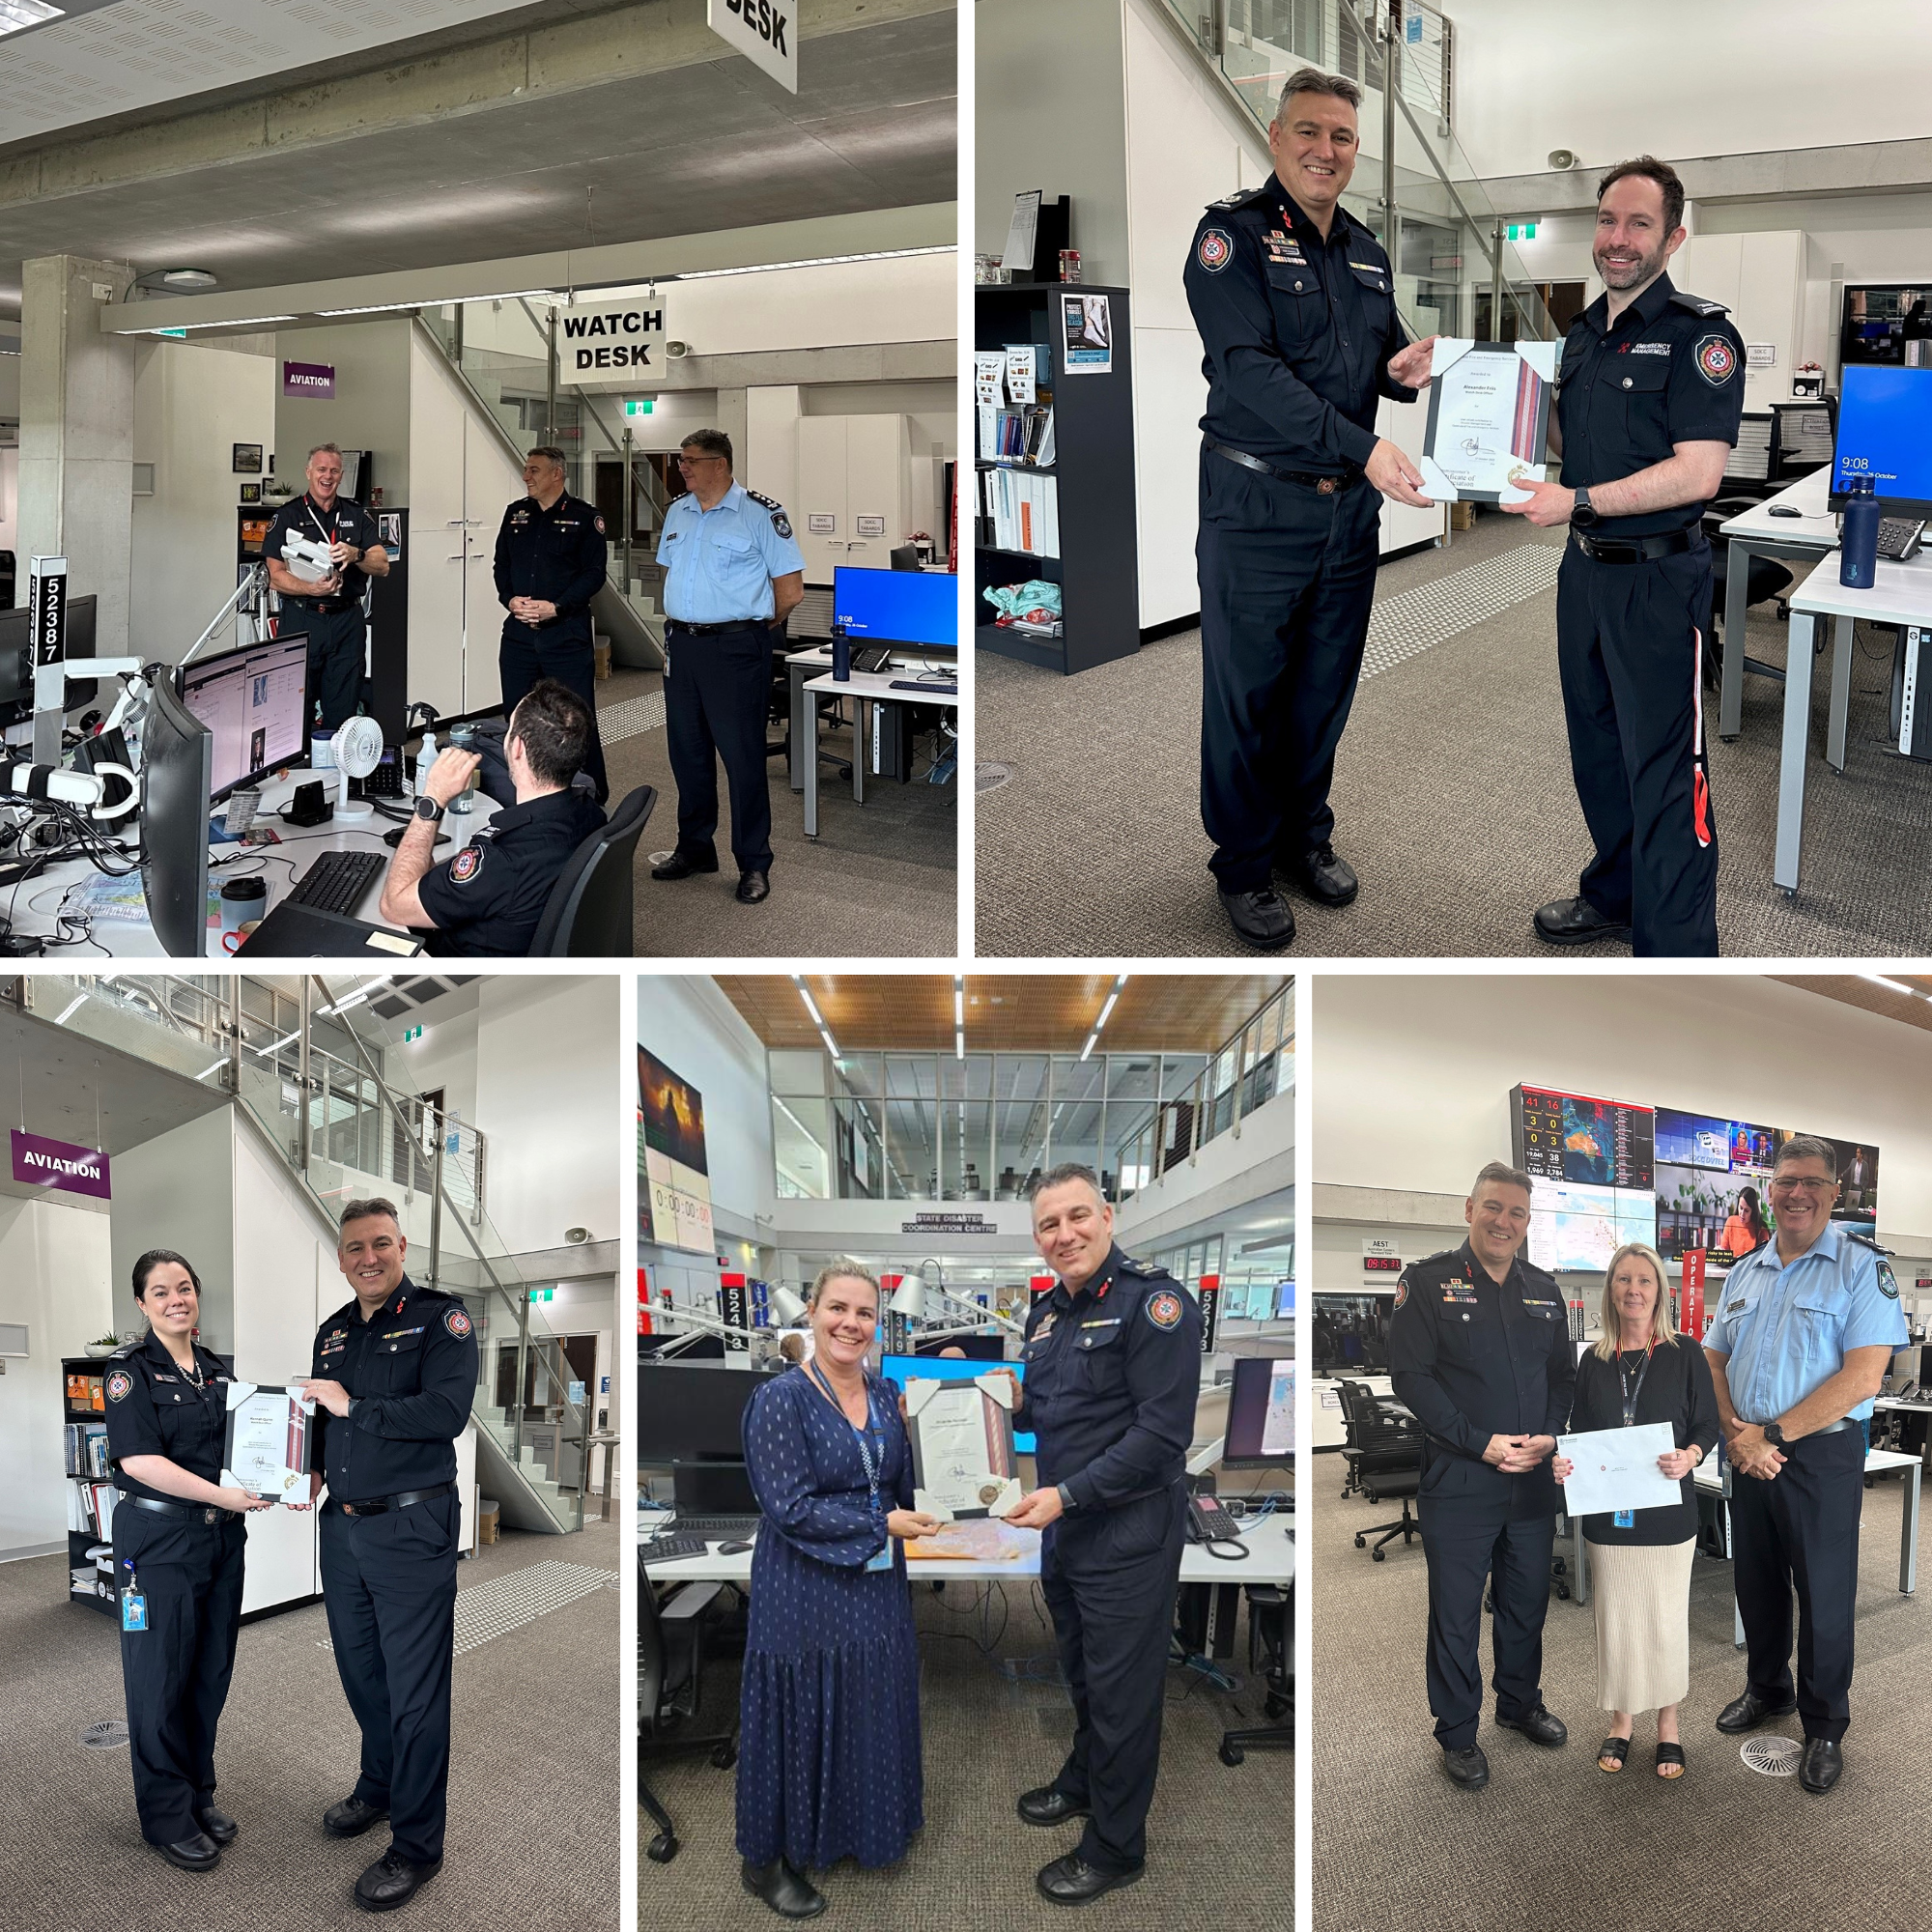 Photos of QFES staff being given certificates